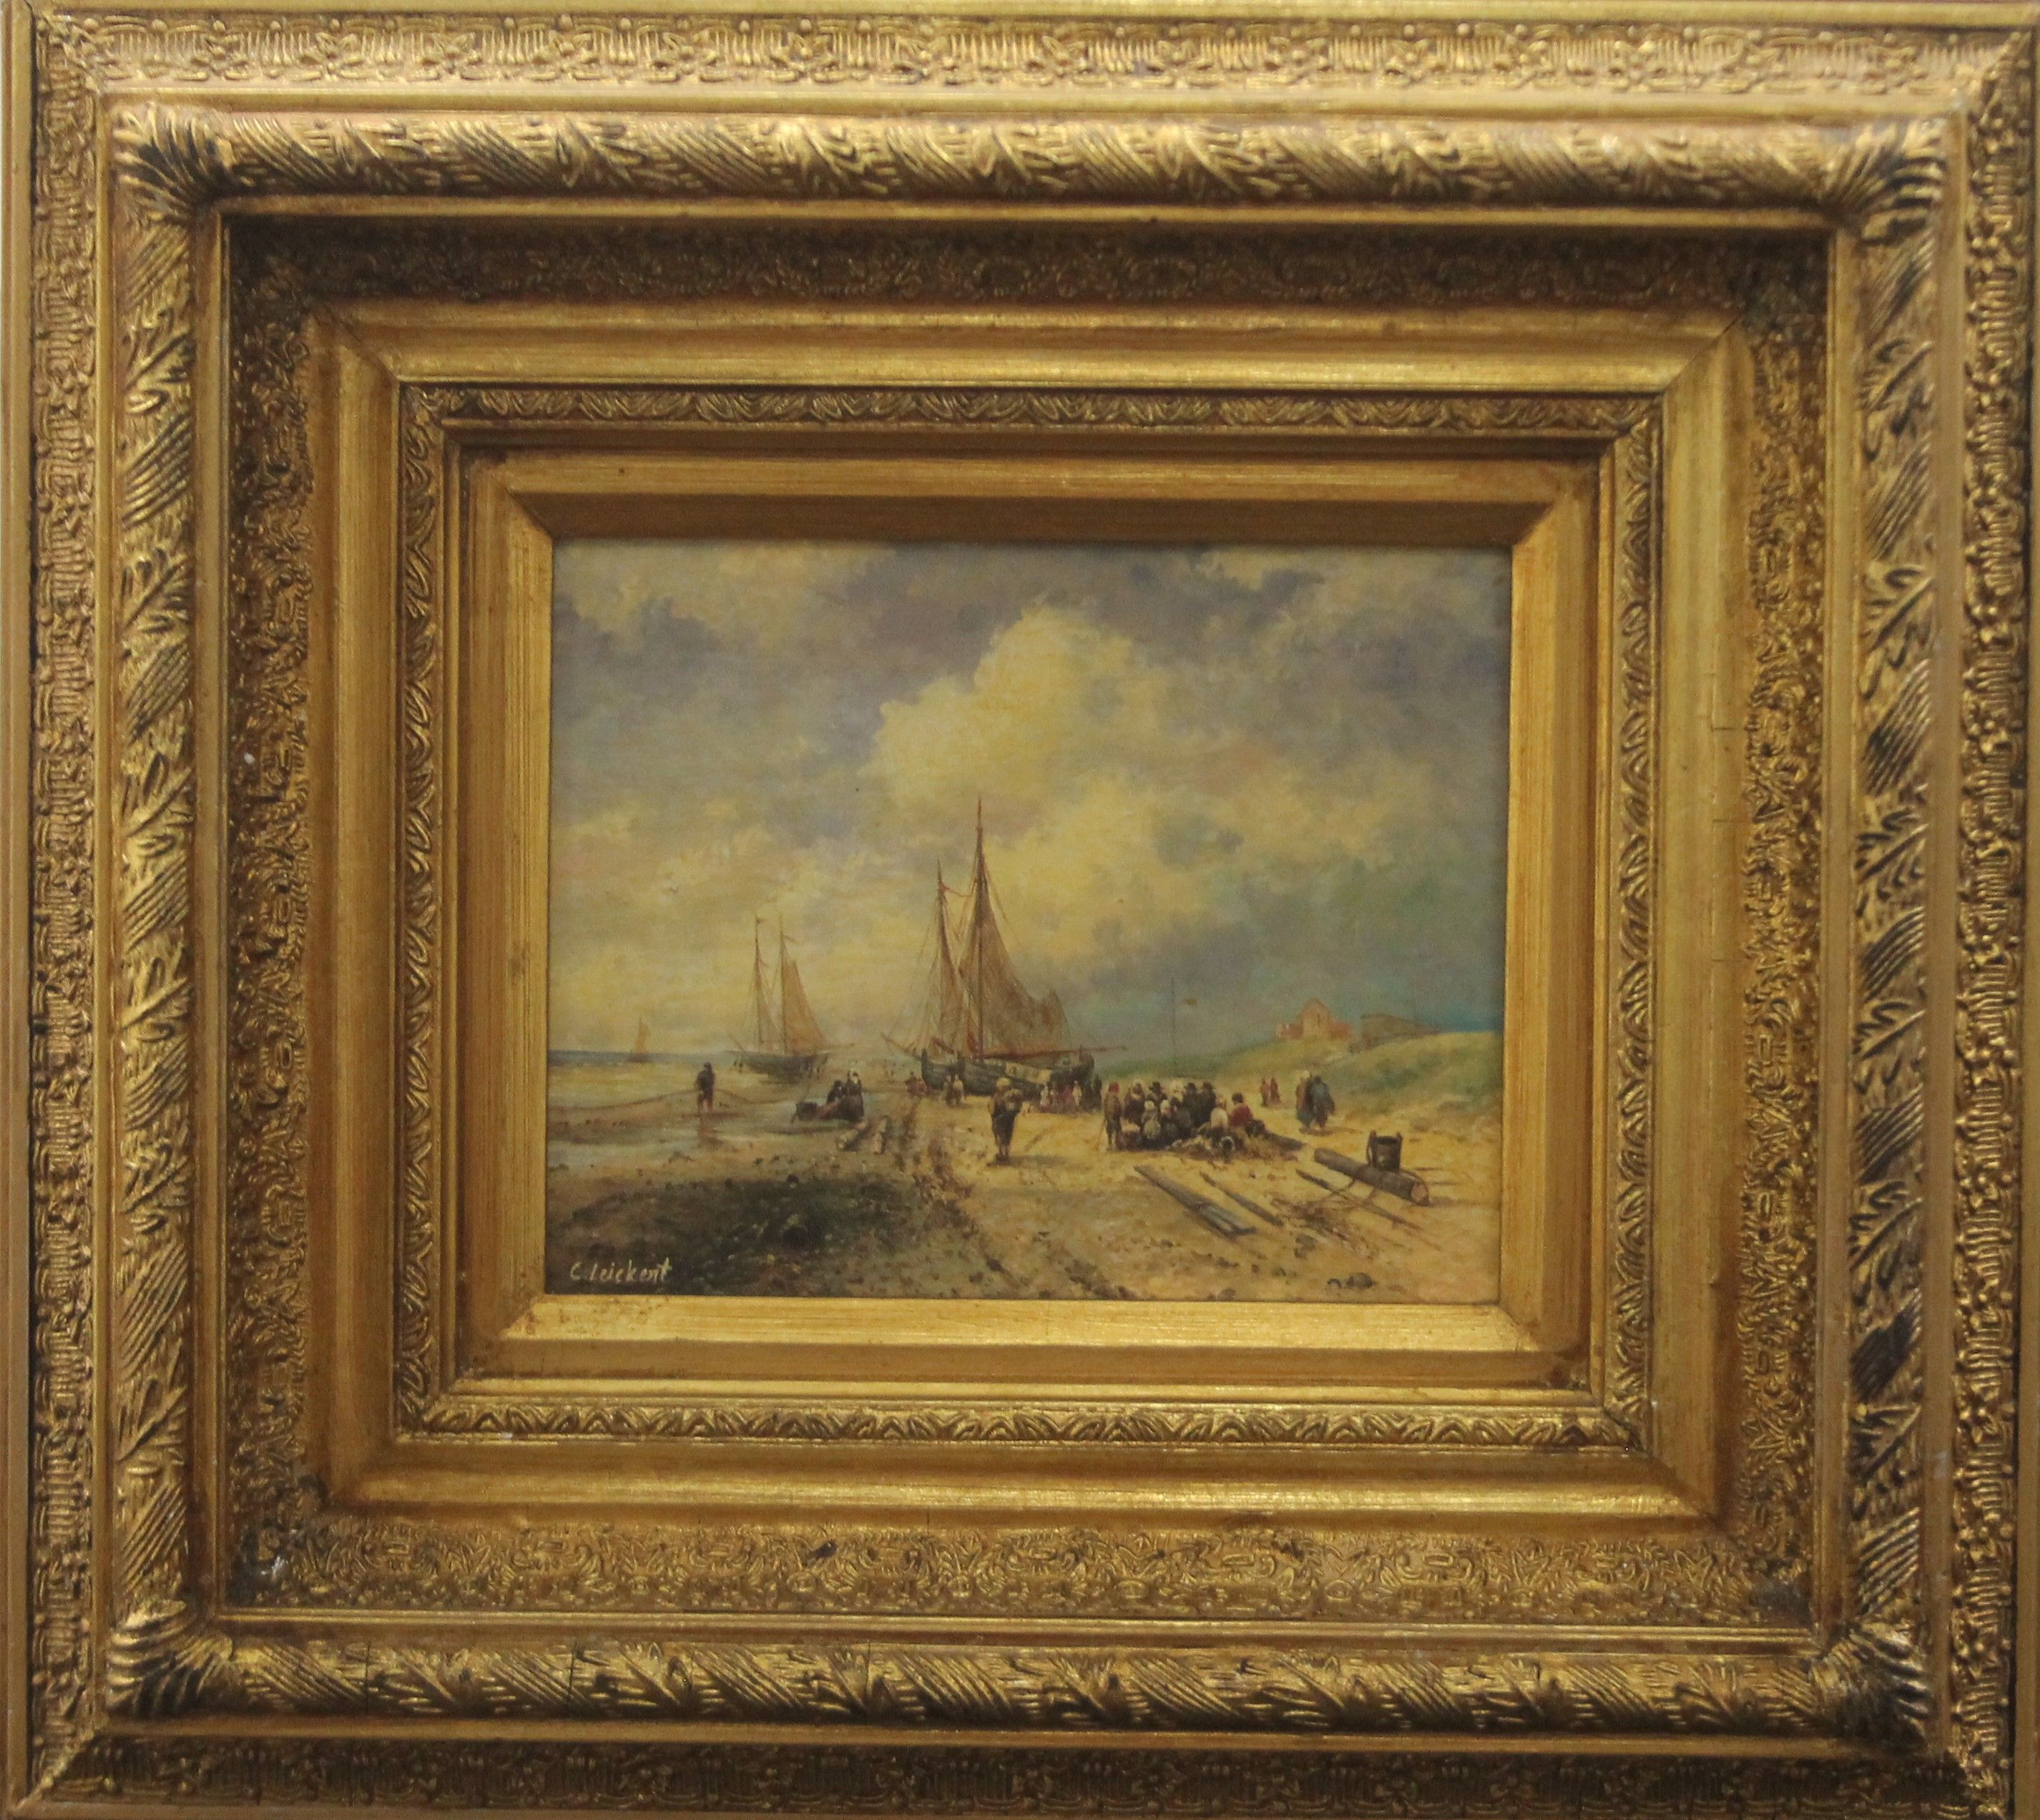 A gilt framed picture of Fishing Boats. 24 x 19 cm. - Image 2 of 3